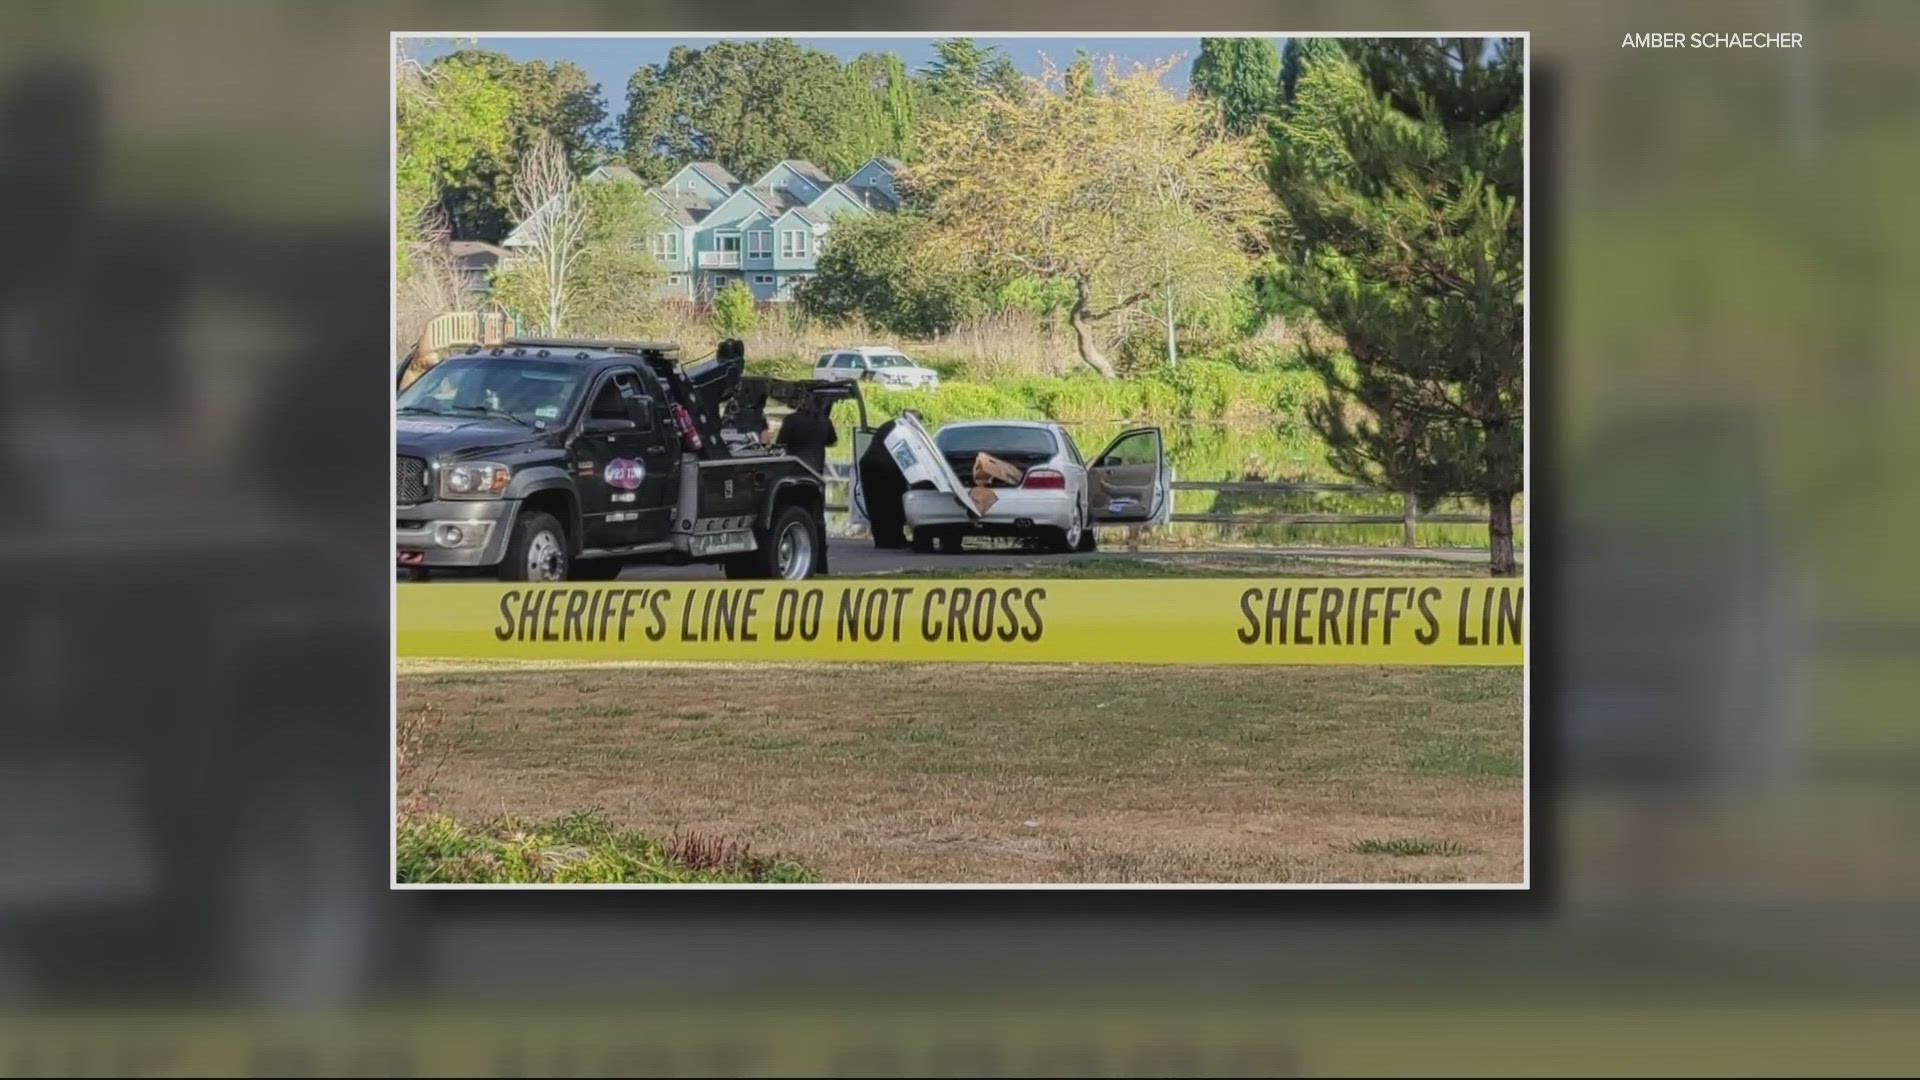 The man found inside the car was identified by the Washington County Sheriff's Office as Mark Shelton, 56. Deputies said the vehicle drove into the lake at 3:24 a.m.